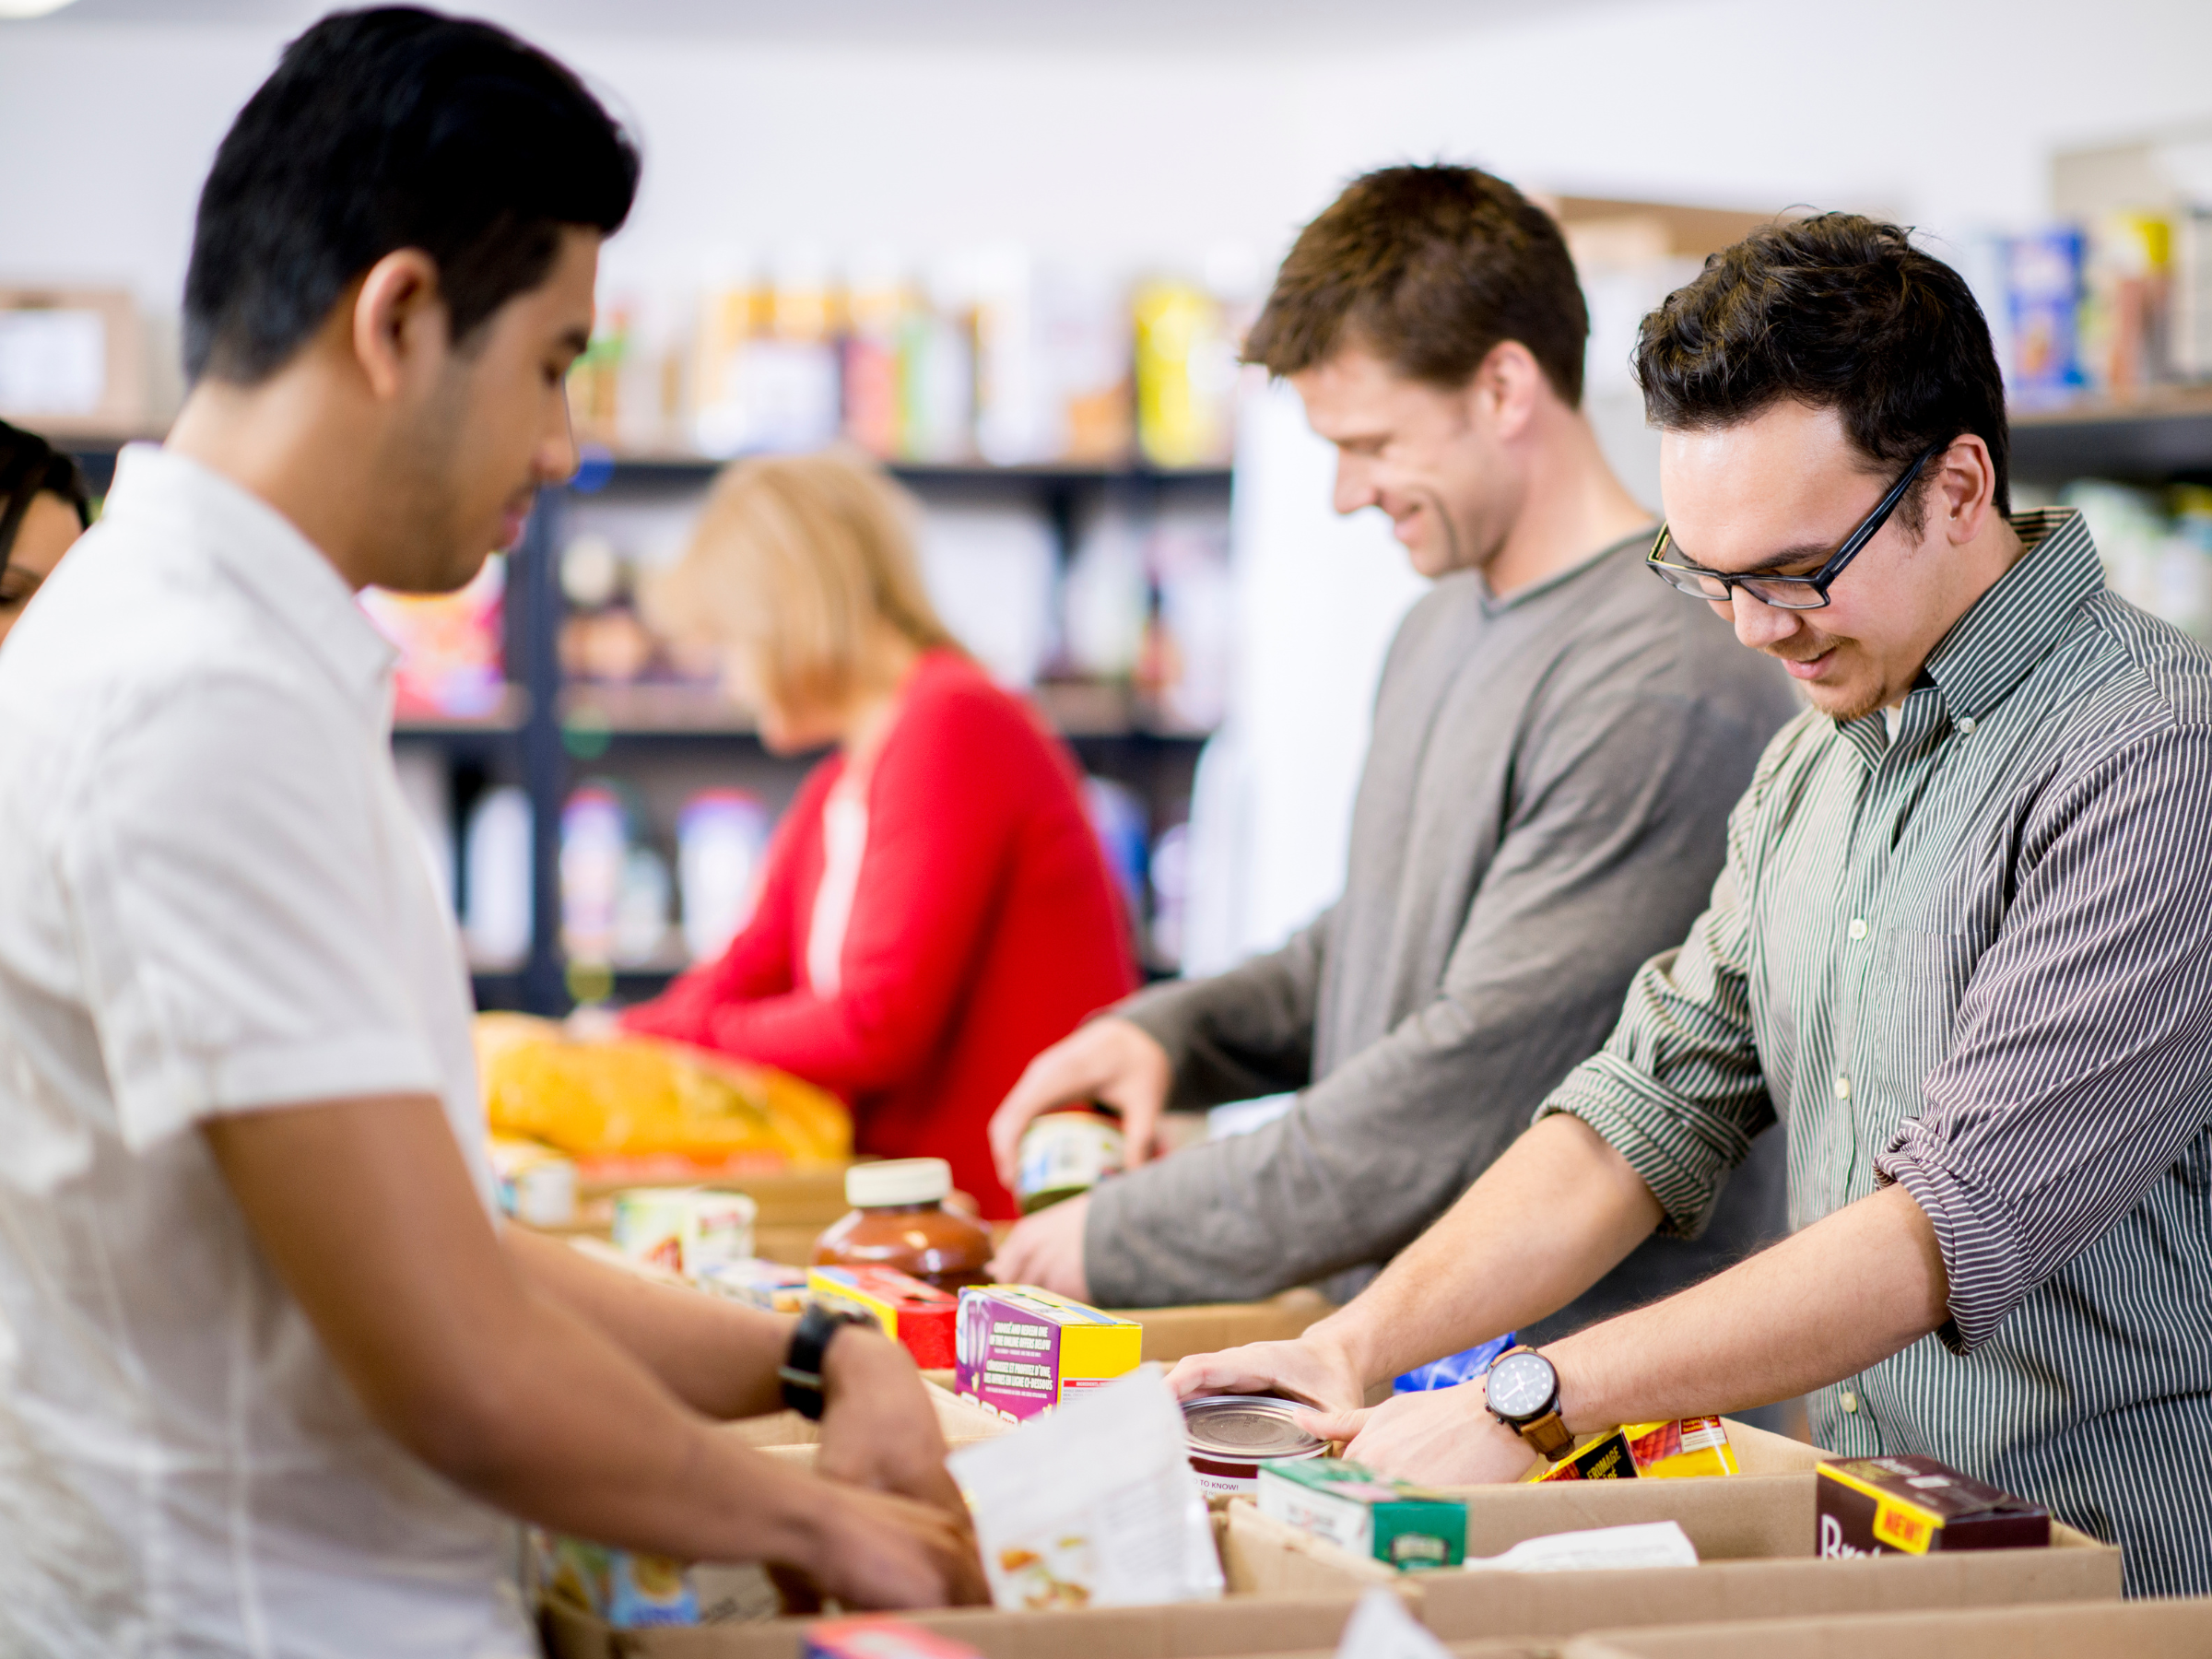 Young Adults At A Community Service Food Bank, Helping With Donations